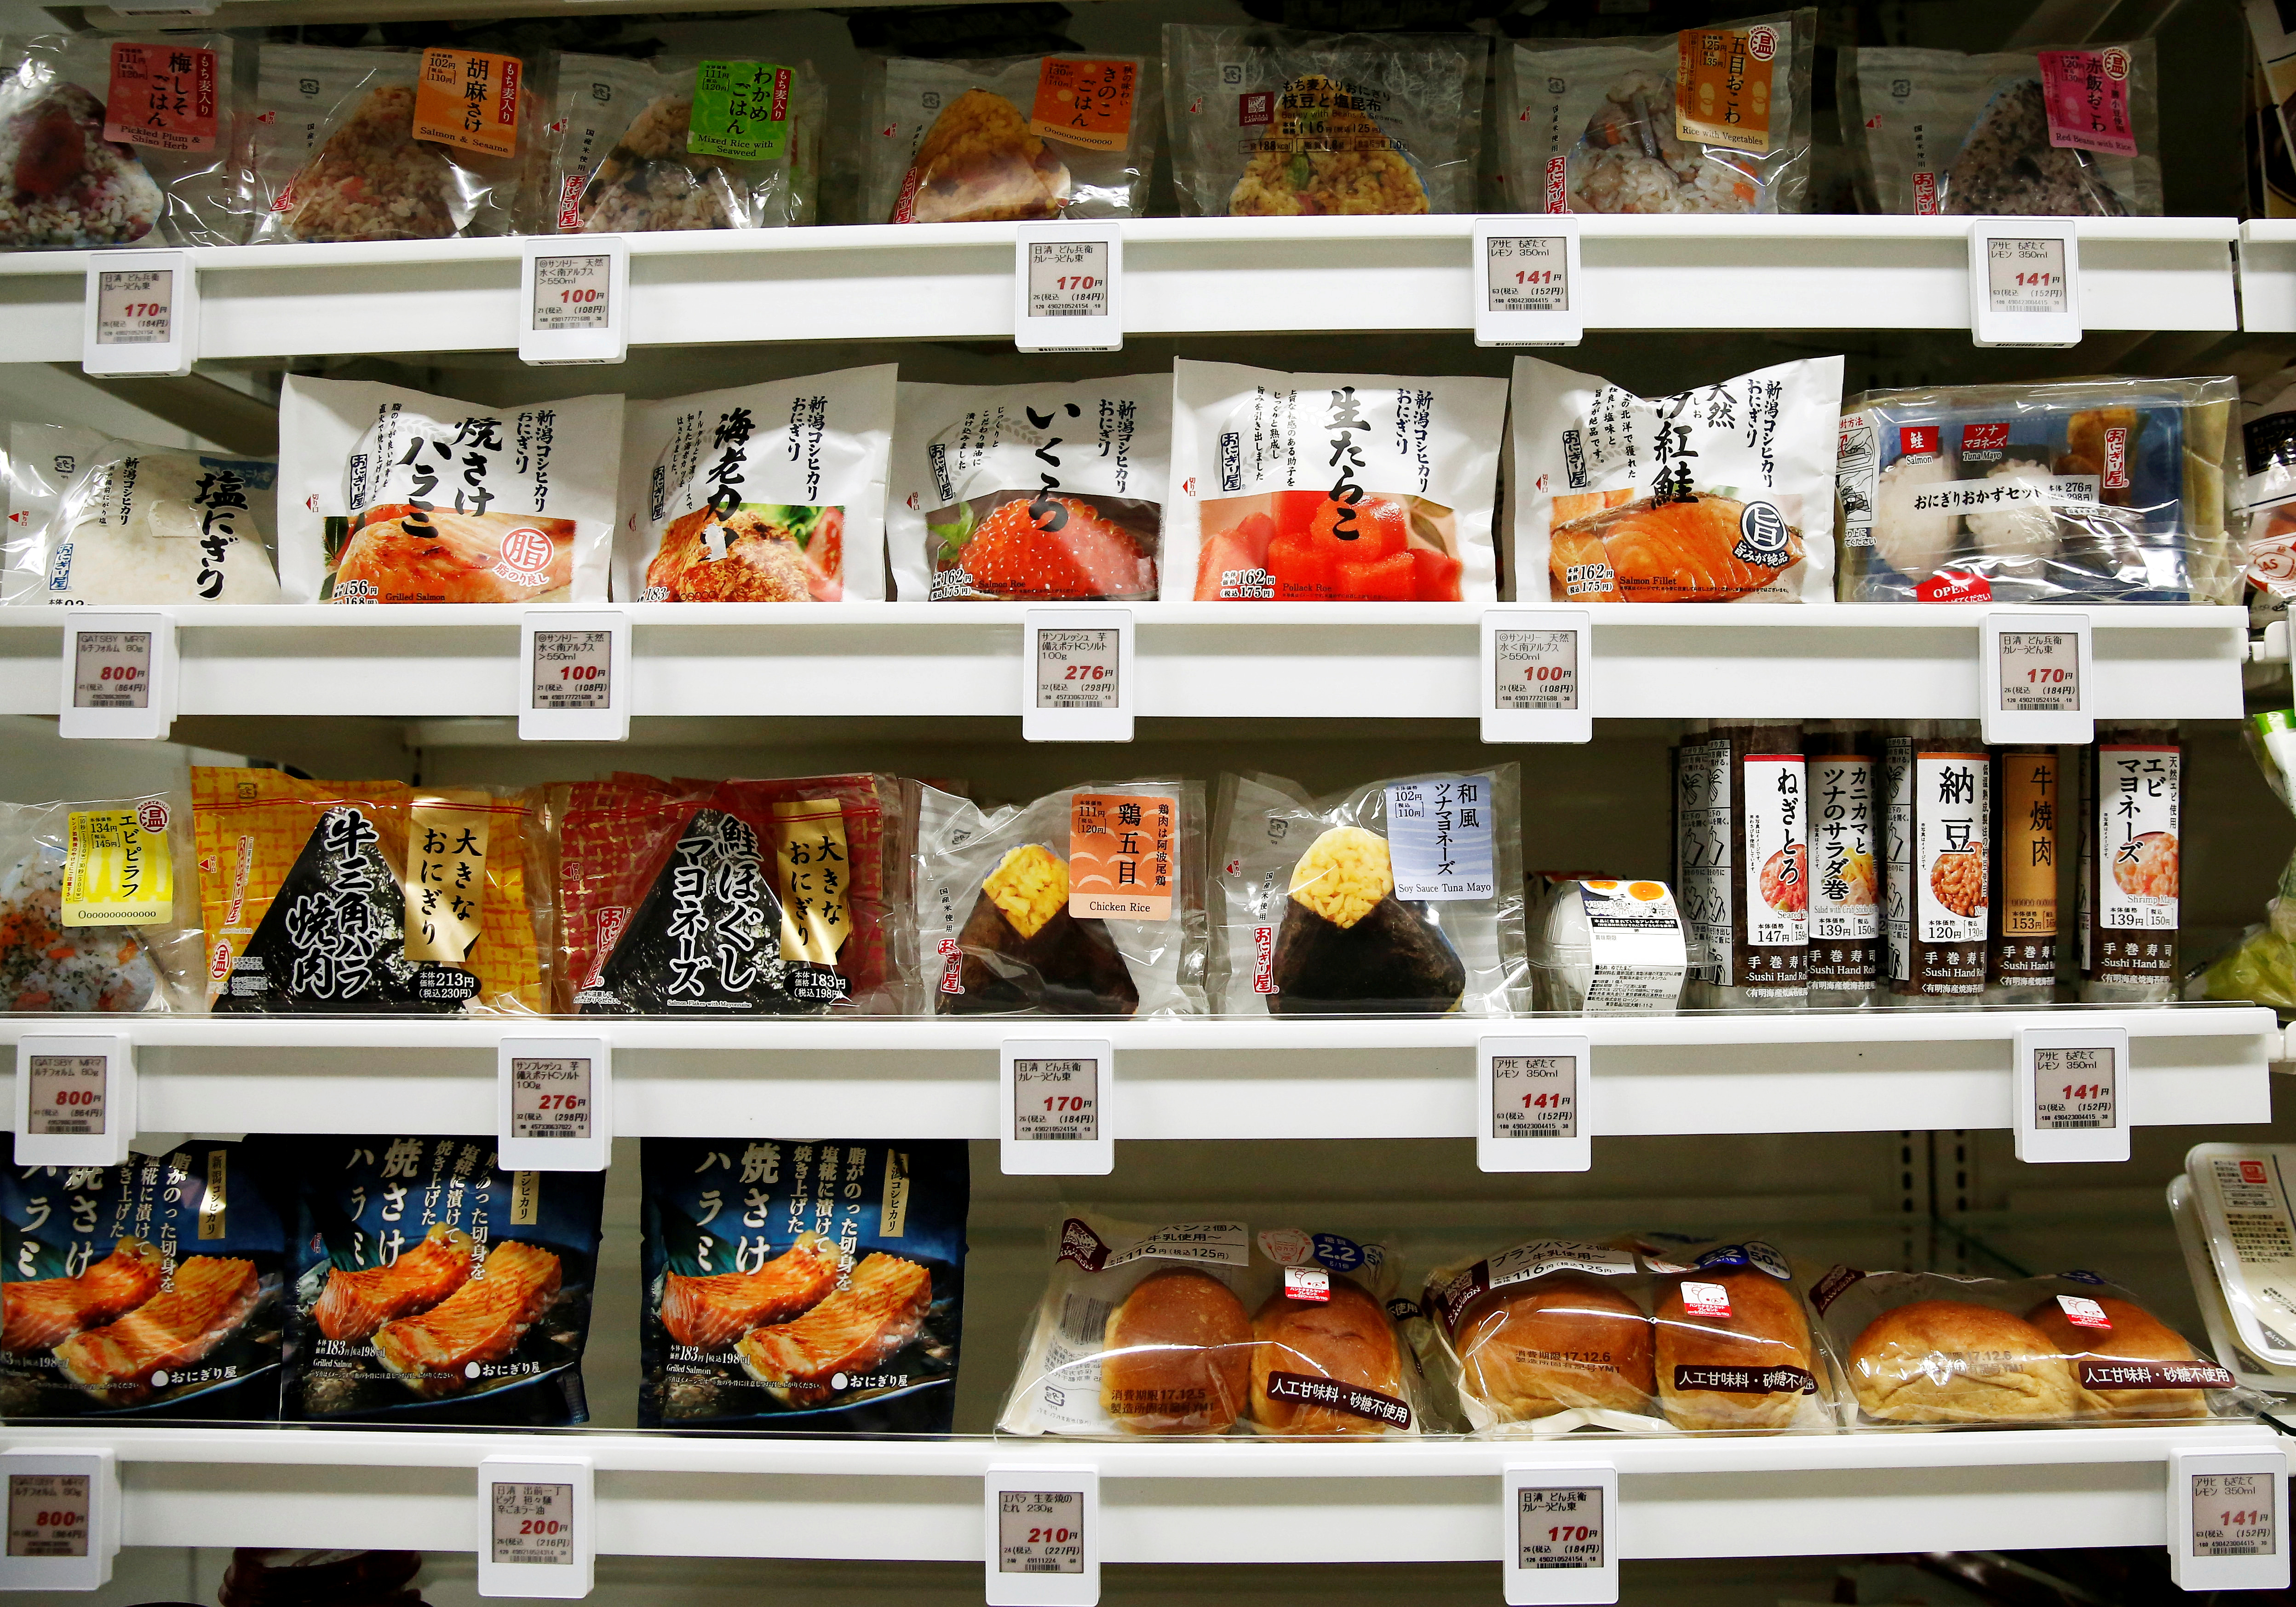 Food products are displayed at Lawson Open Innovation center during an event introducing its next-generation convenience store model in Tokyo